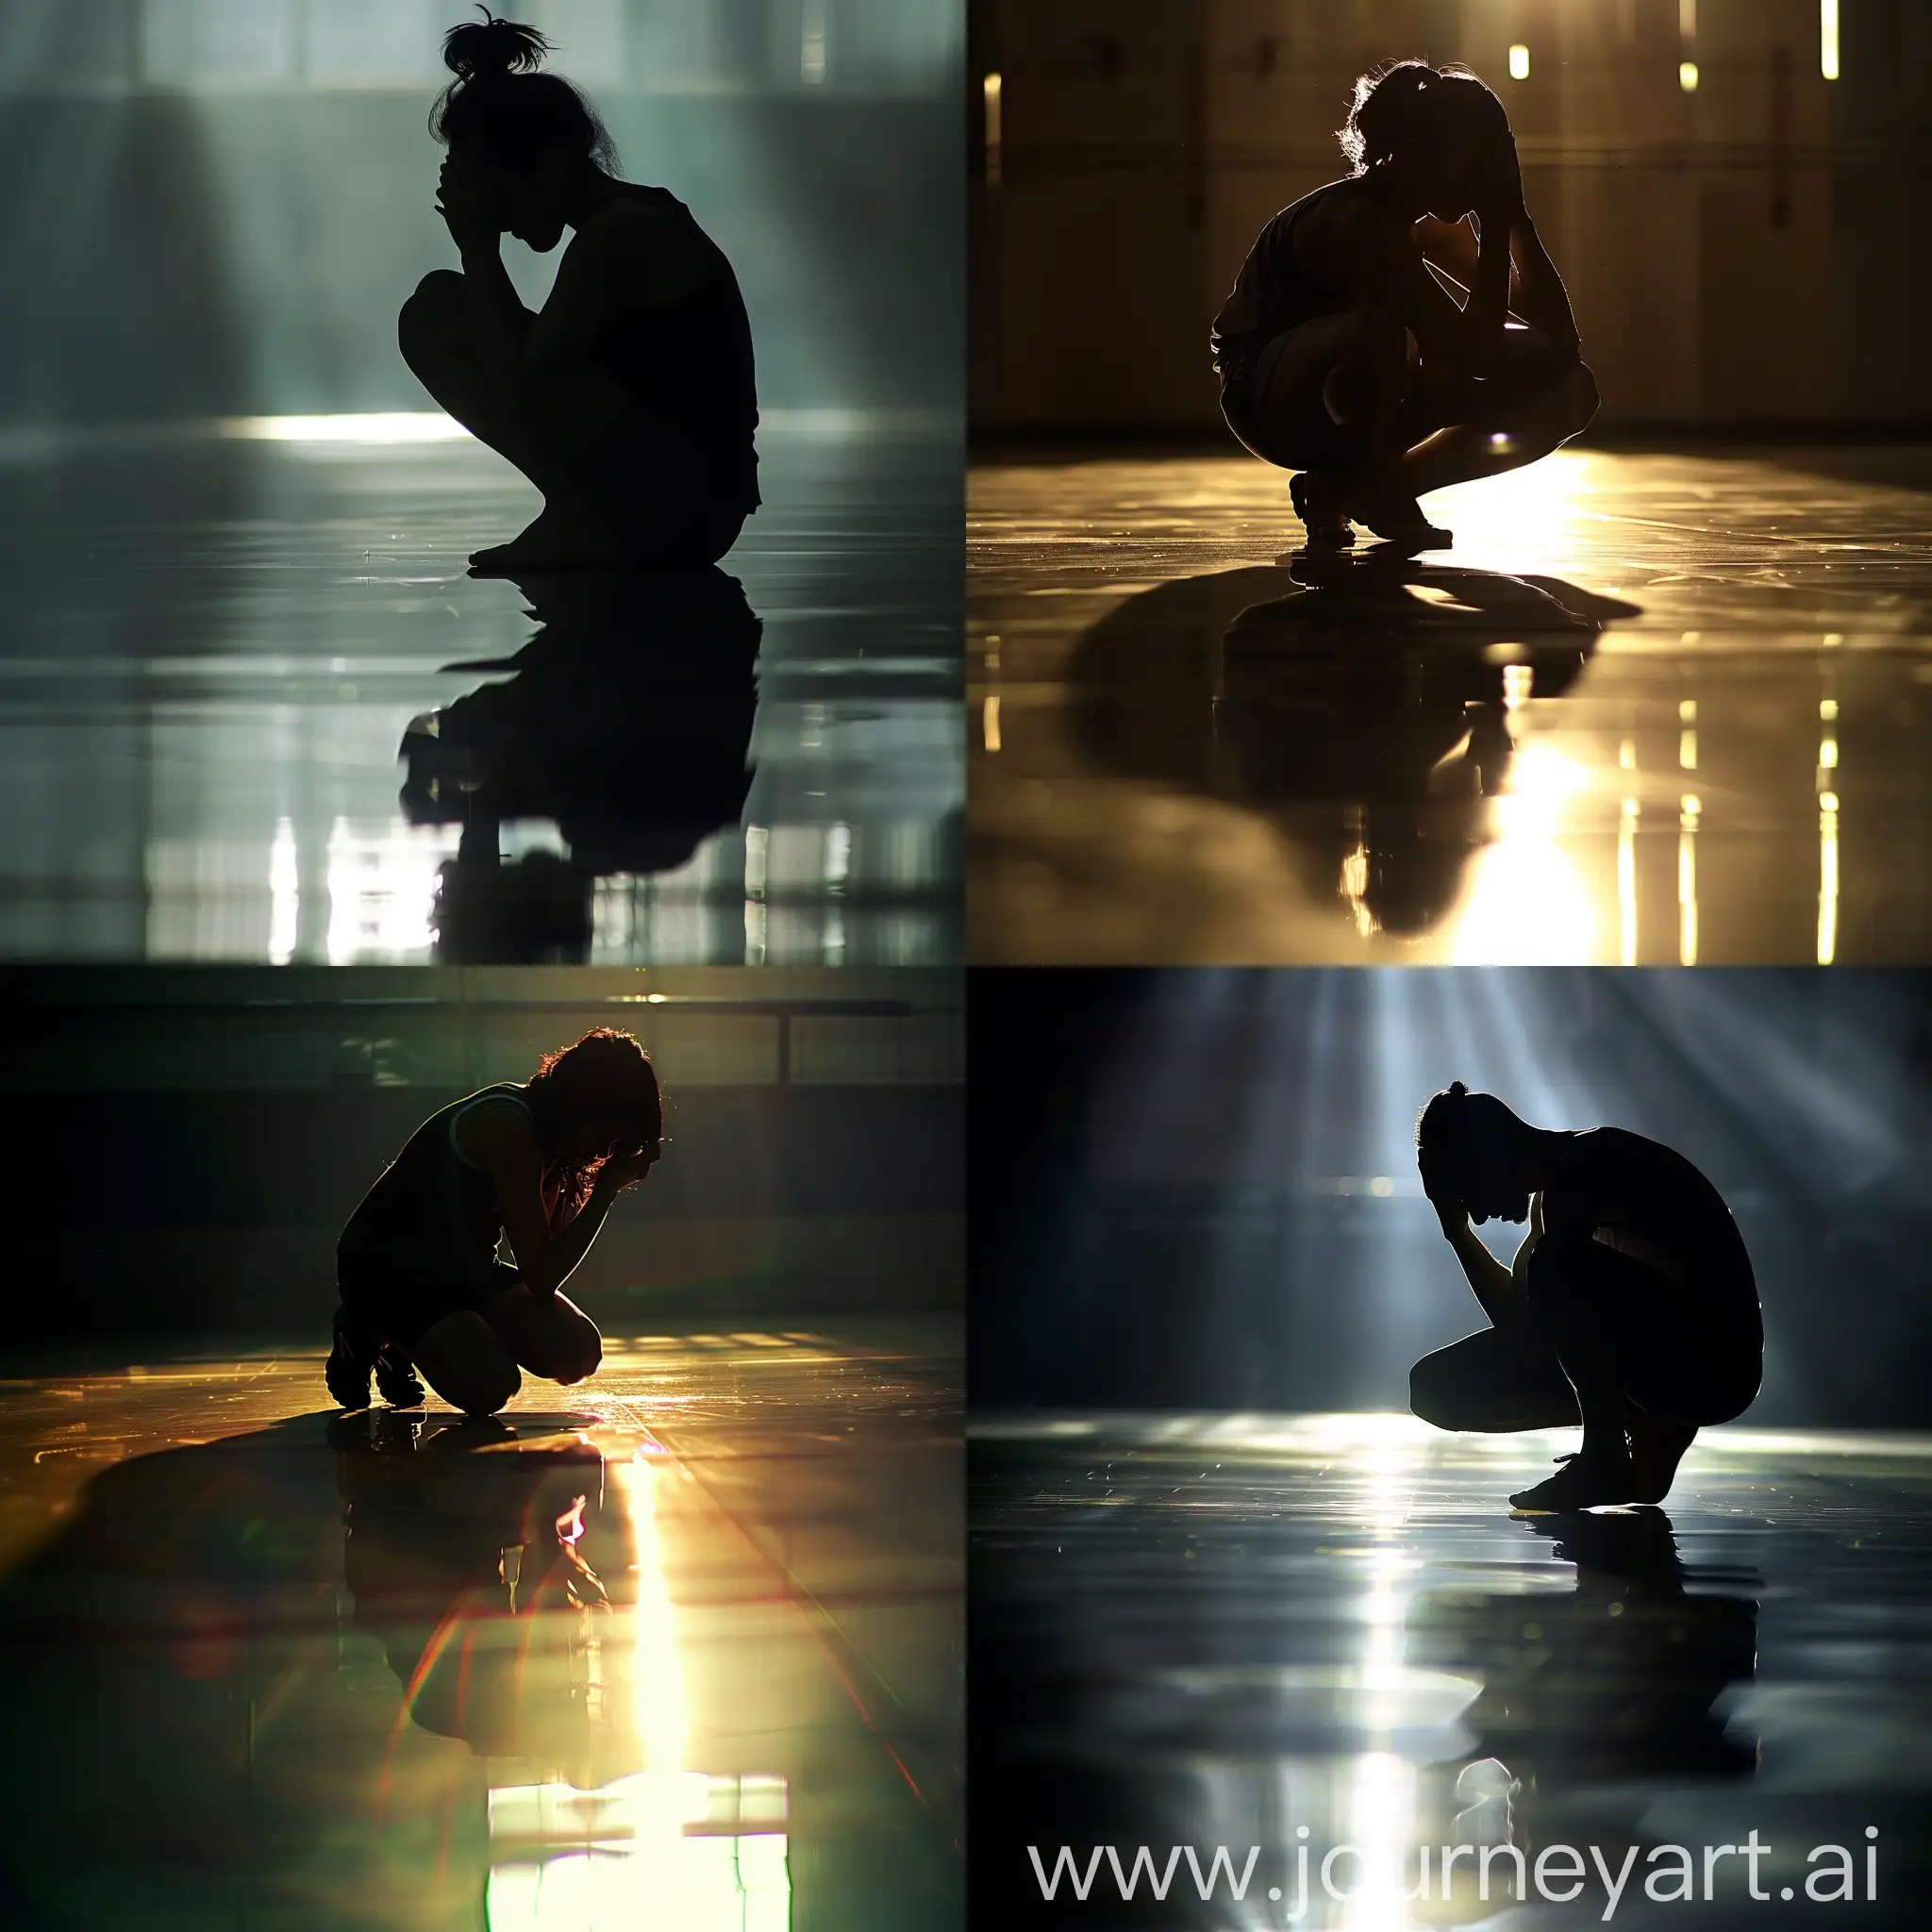 a dimly lit environment with a strong backlight, creating a silhouette effect. It features a person, knelt down on the floor, with their head bowed down and hands clasped together in what might be a gesture of prayer, reflection, or deep thought. The individual seems to be wearing a sleeveless top, which suggests casual or athletic wear. The silhouette is sharply reflected on the shiny floor, which adds a dramatic and solemn mood to the image. The atmosphere is contemplative and evokes a sense of solitude. The lighting and composition contribute to a strong visual impact, highlighting the person as the focal point against the subtle details of the surrounding environment.